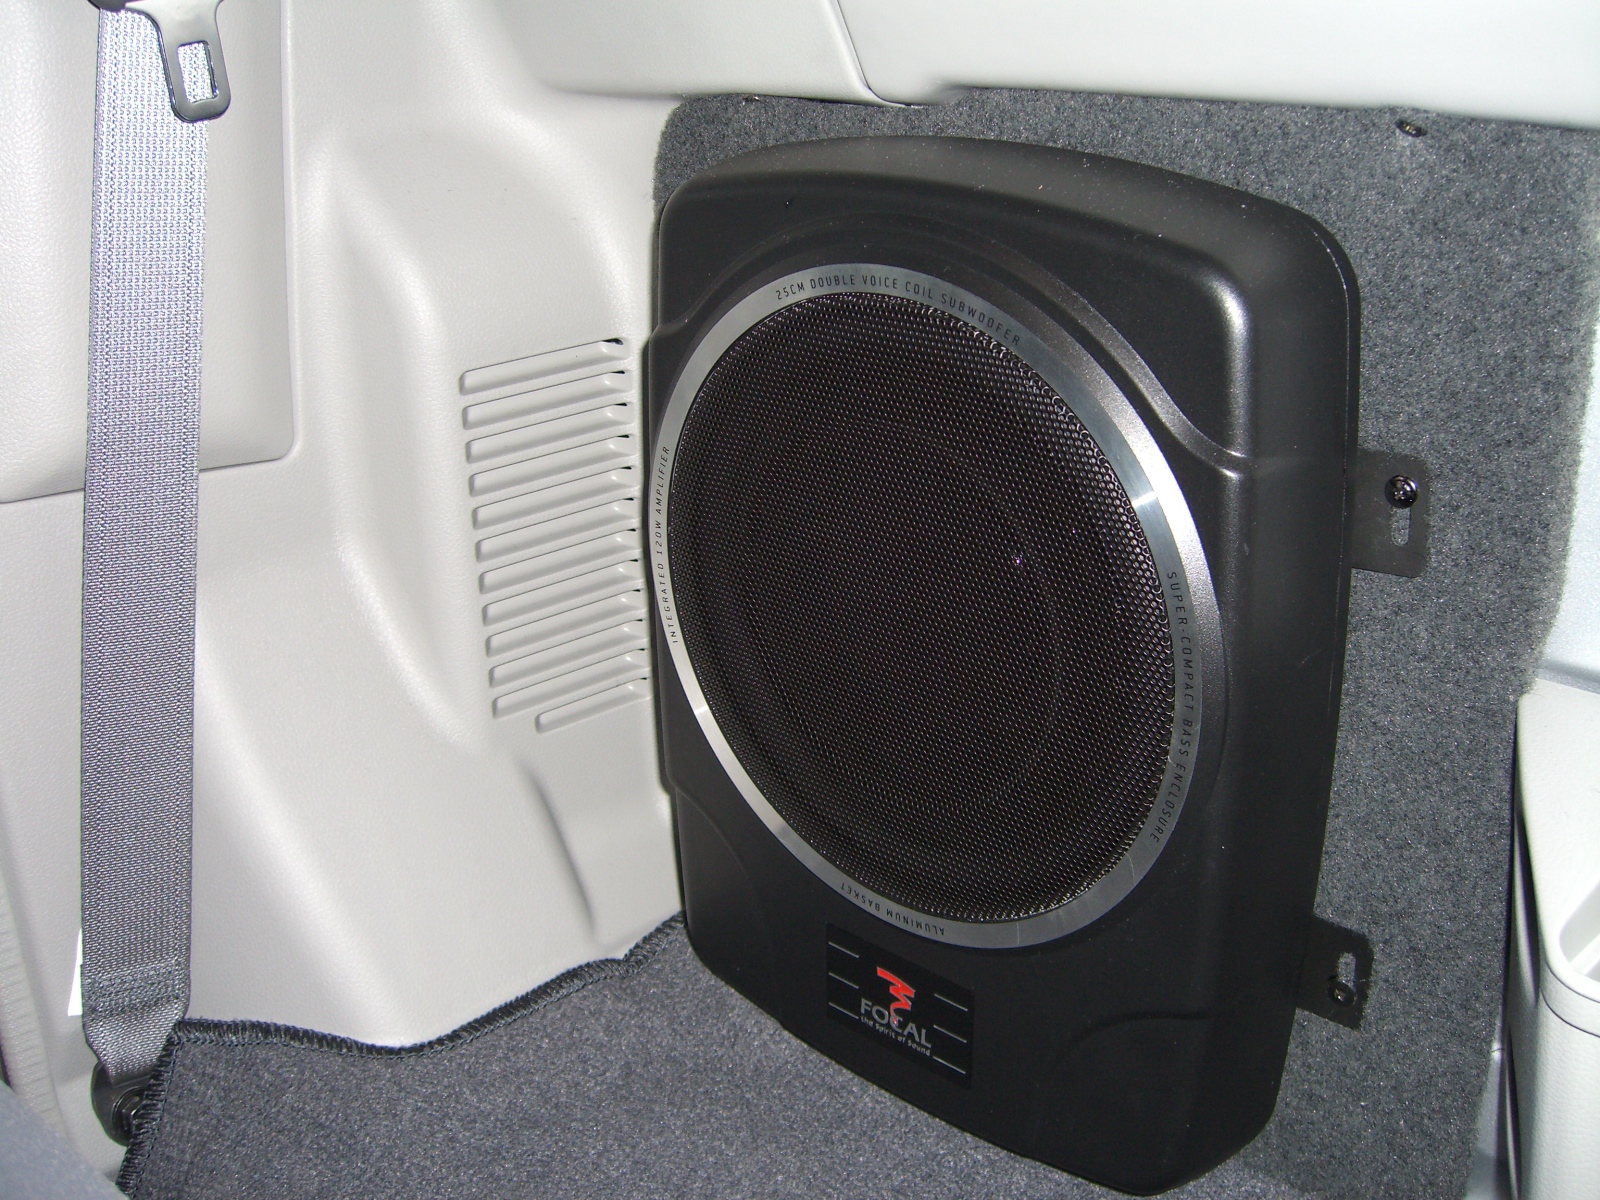 Toyota 79 series Focal bus 25 great sub upgrade to factory audio system